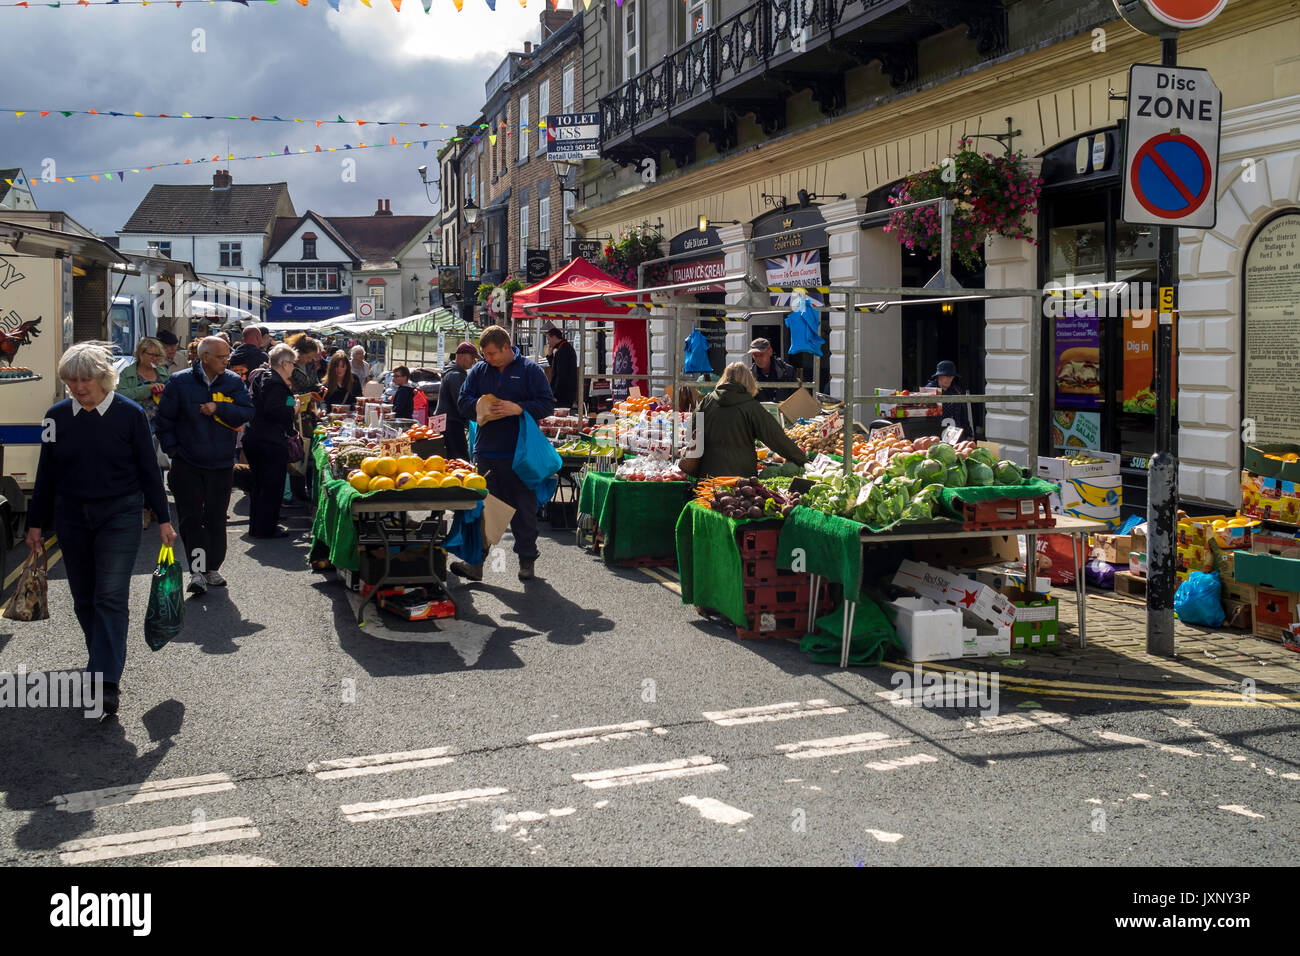 Regular weekly market in Knaresborough North Yorkshire busy crowd and fruit and vegetables on display. Stock Photo